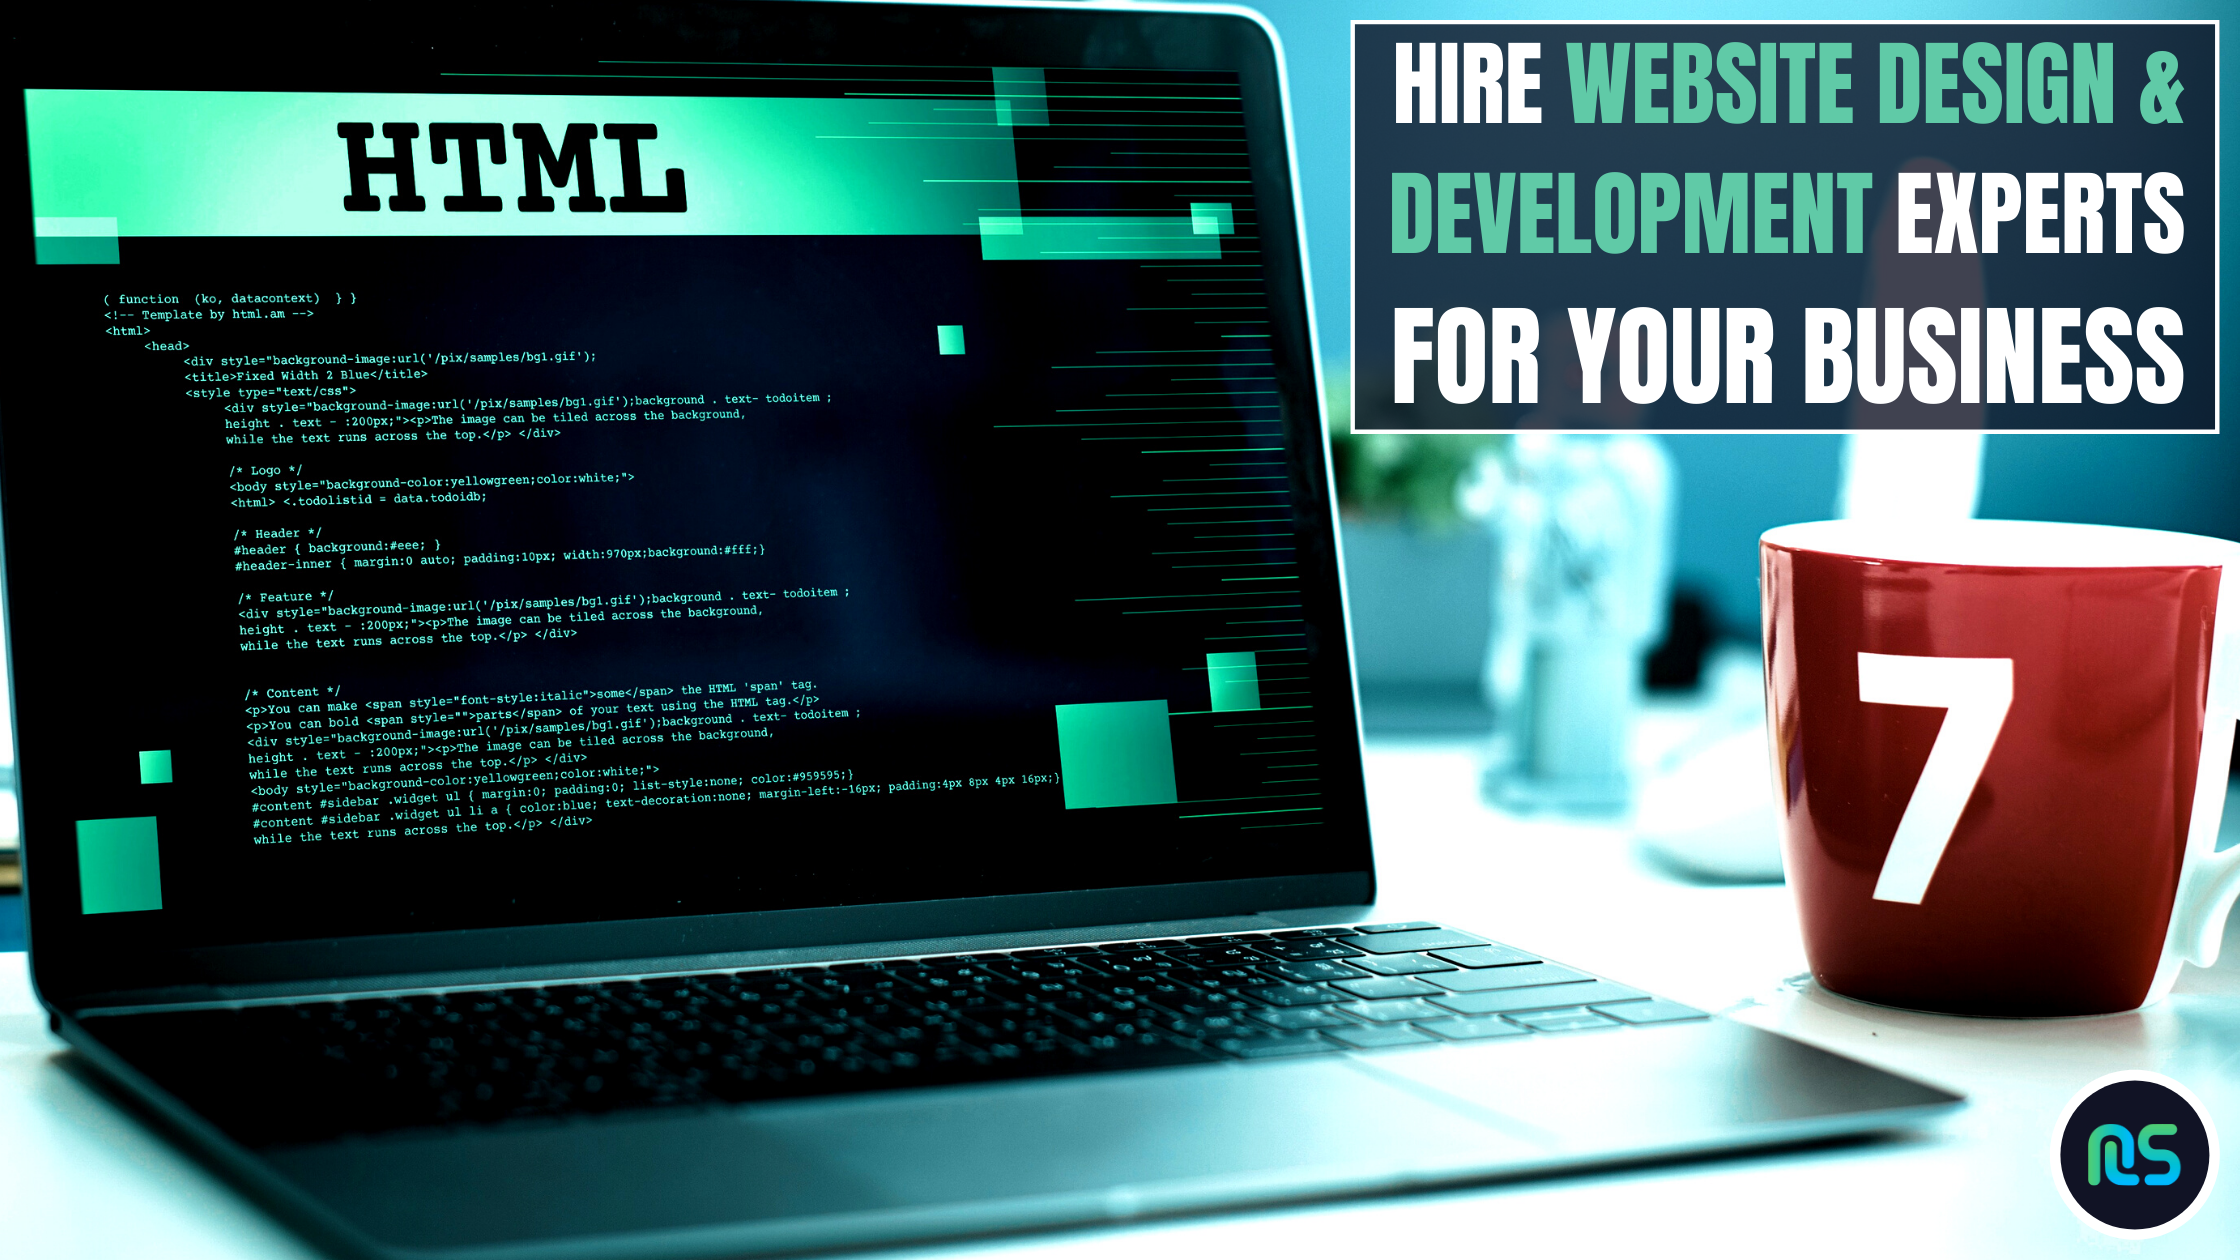 Hire Website Design & Development Experts For Your Business